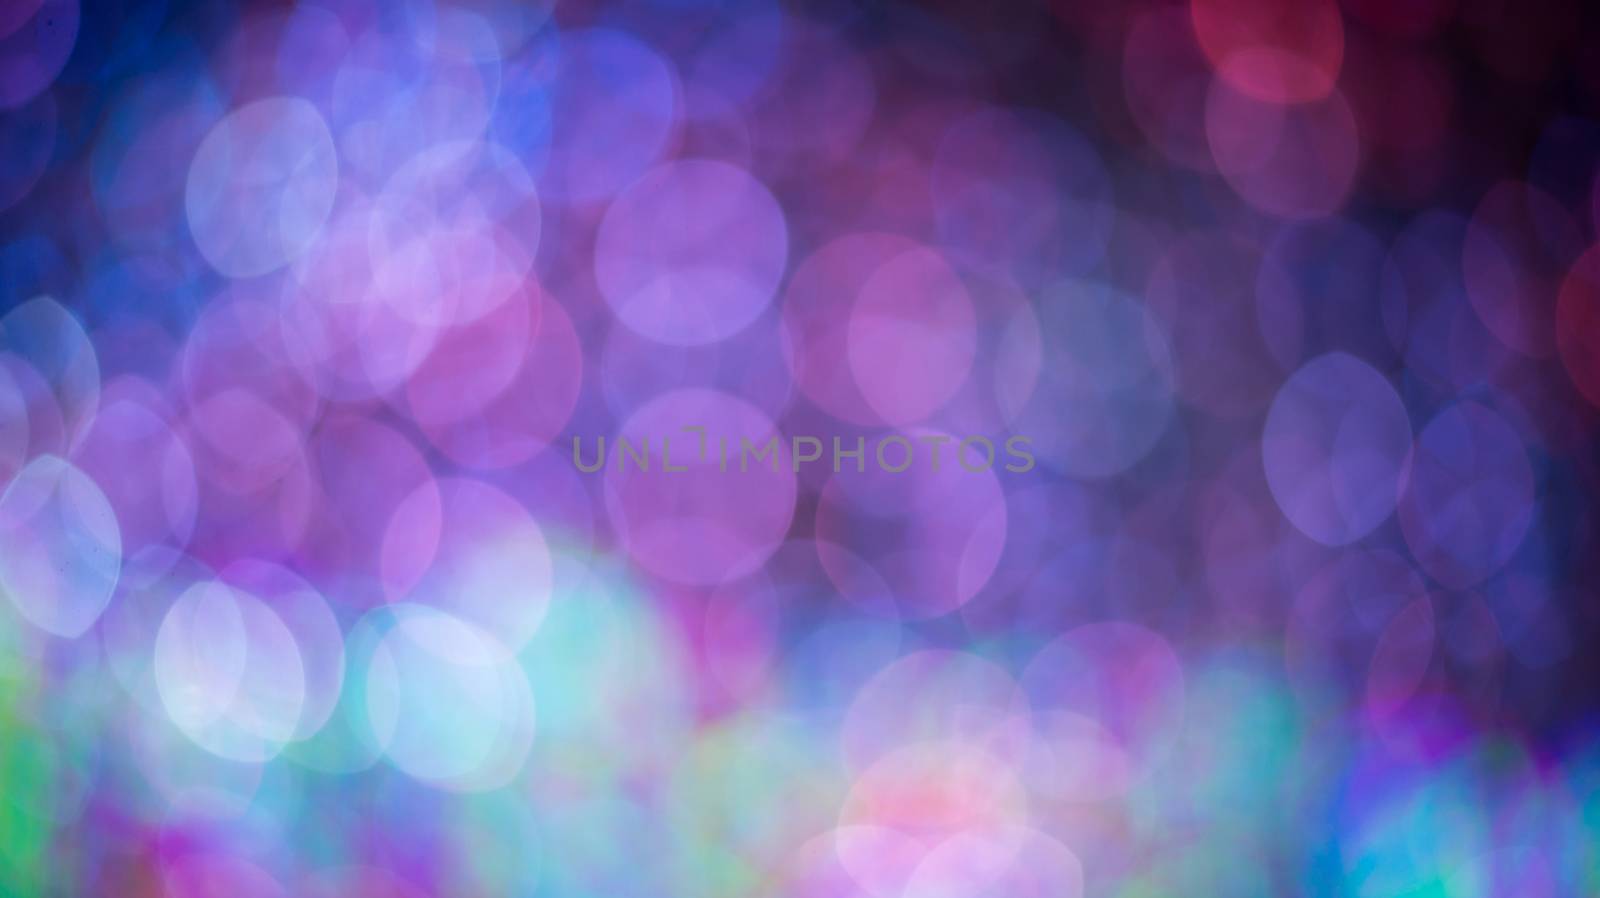 Artistic style - Defocused urban abstract texture background for by chanwity